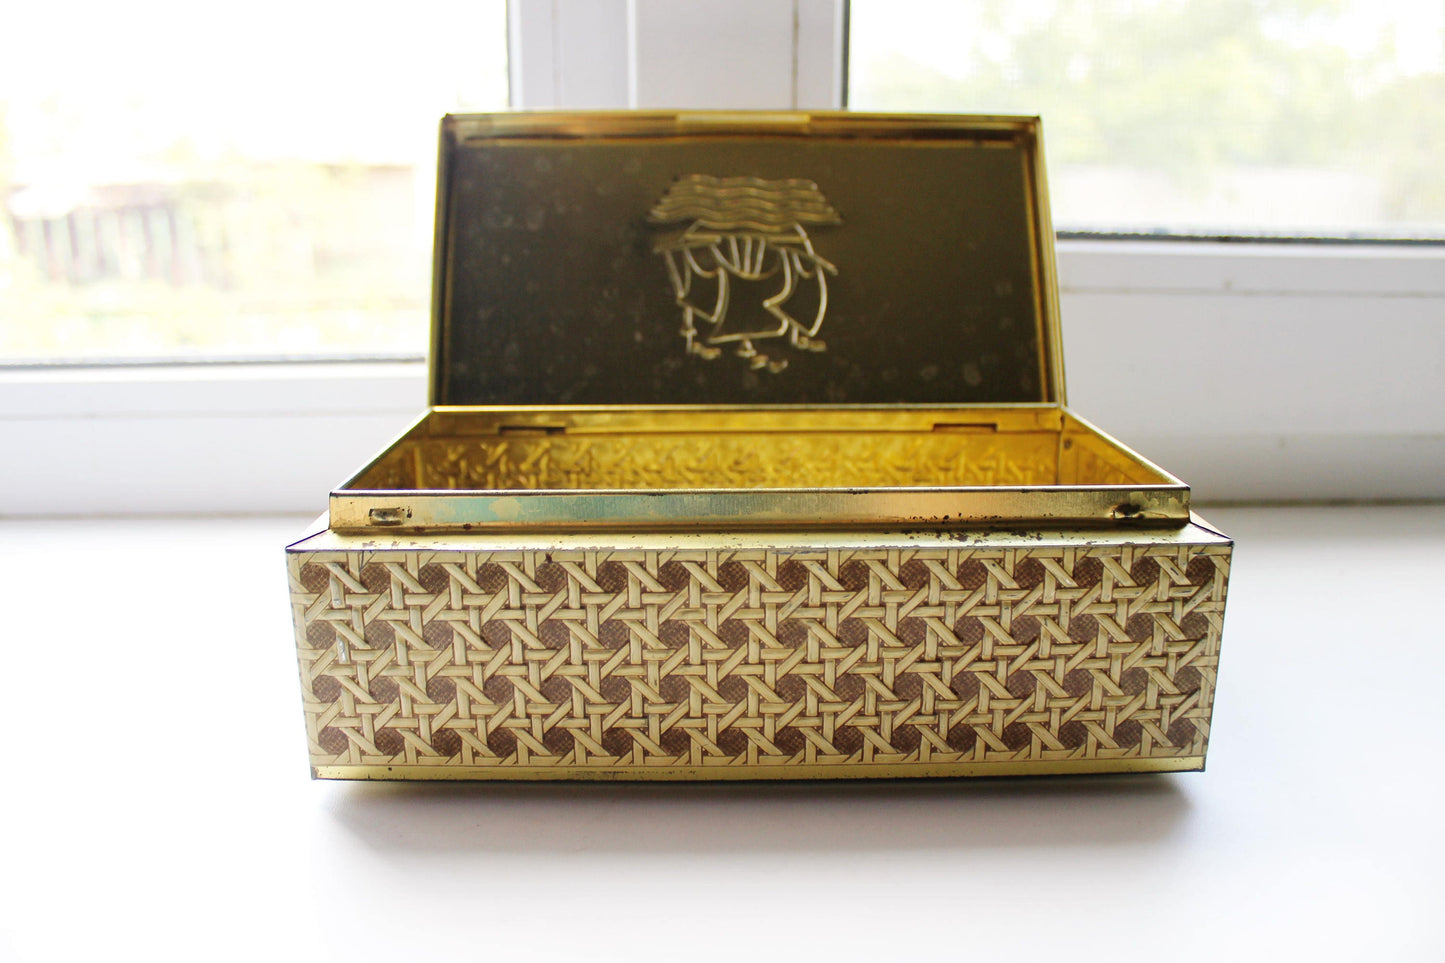 Vintage metall tin box for storing coffee - from Germany - 1970s